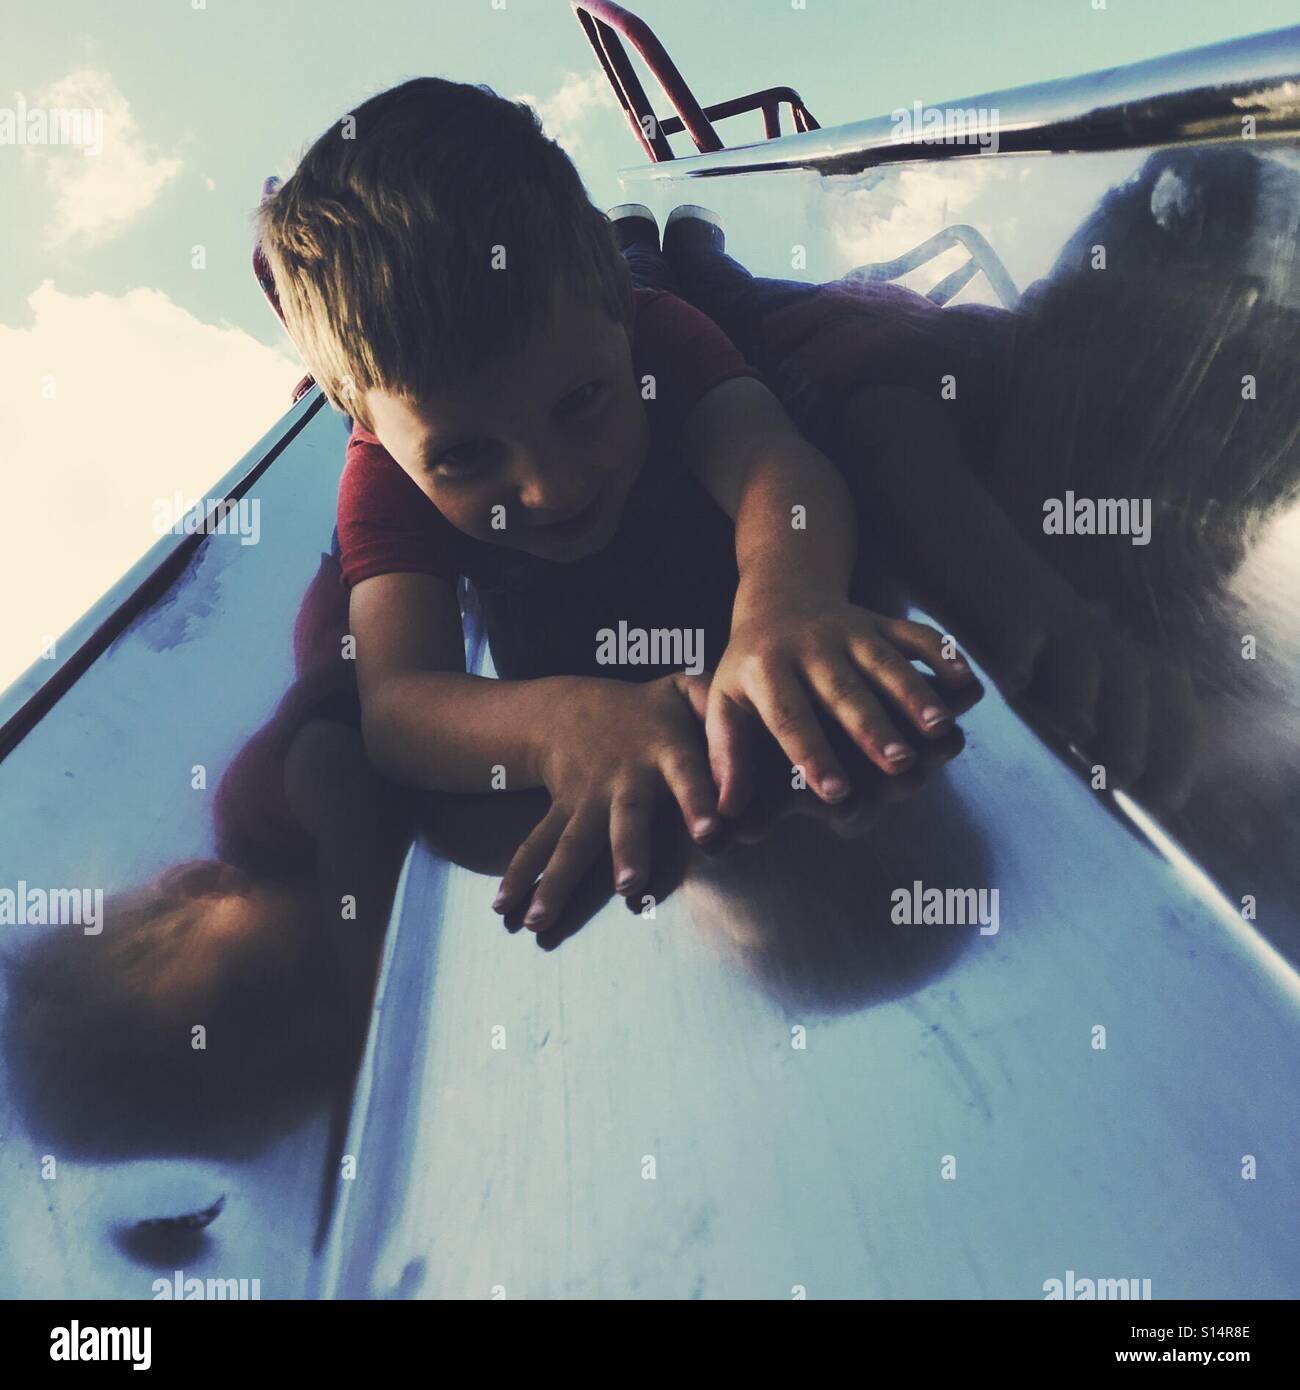 Young boy come down a slide head first Stock Photo